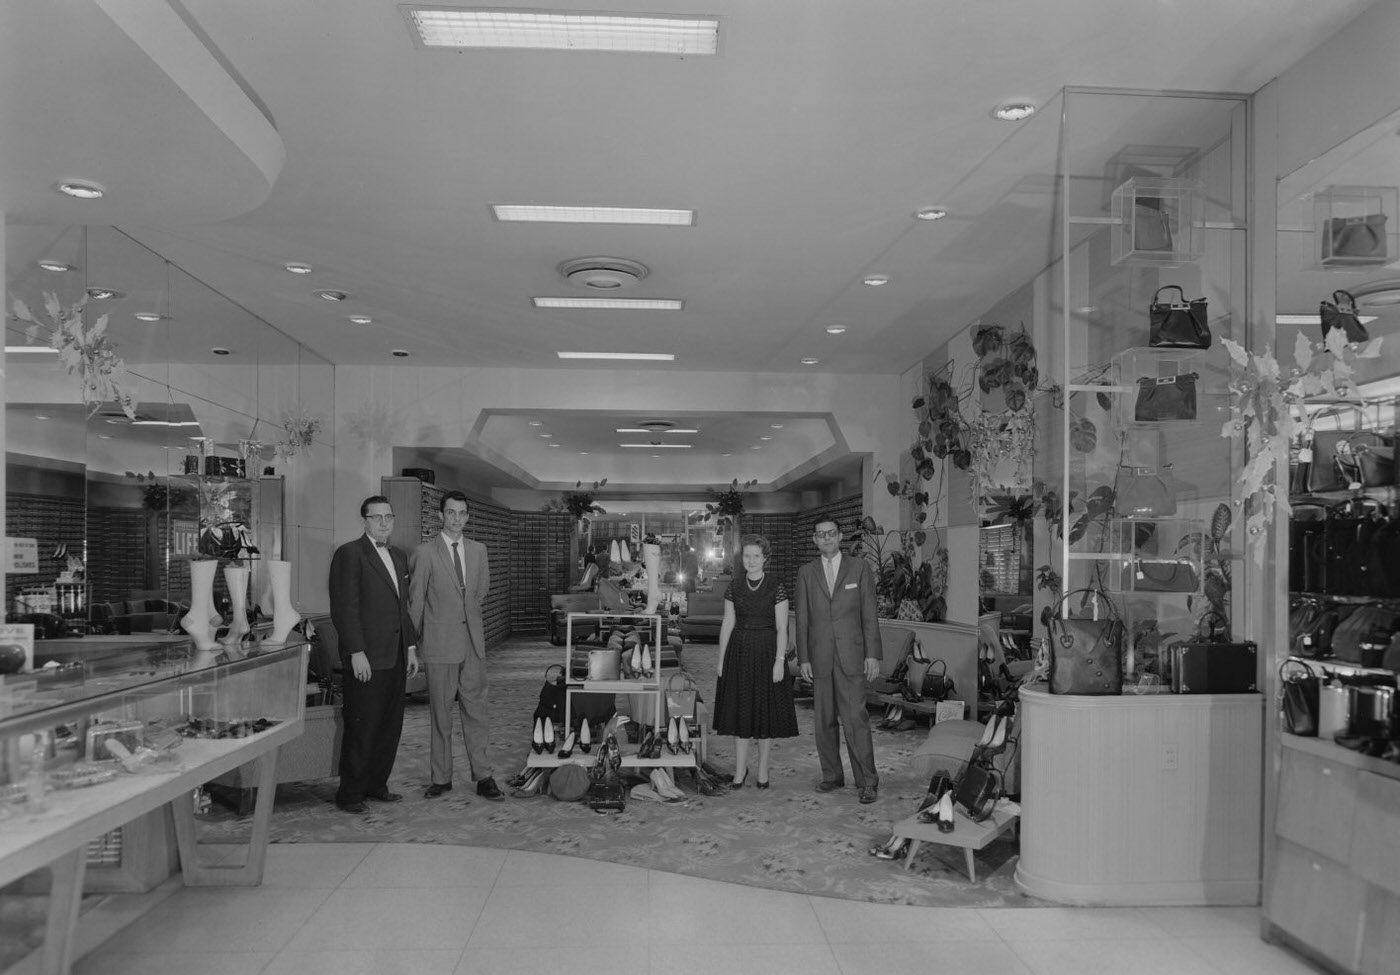 Interior of The Vogue Shop with Men and Women, 1959.